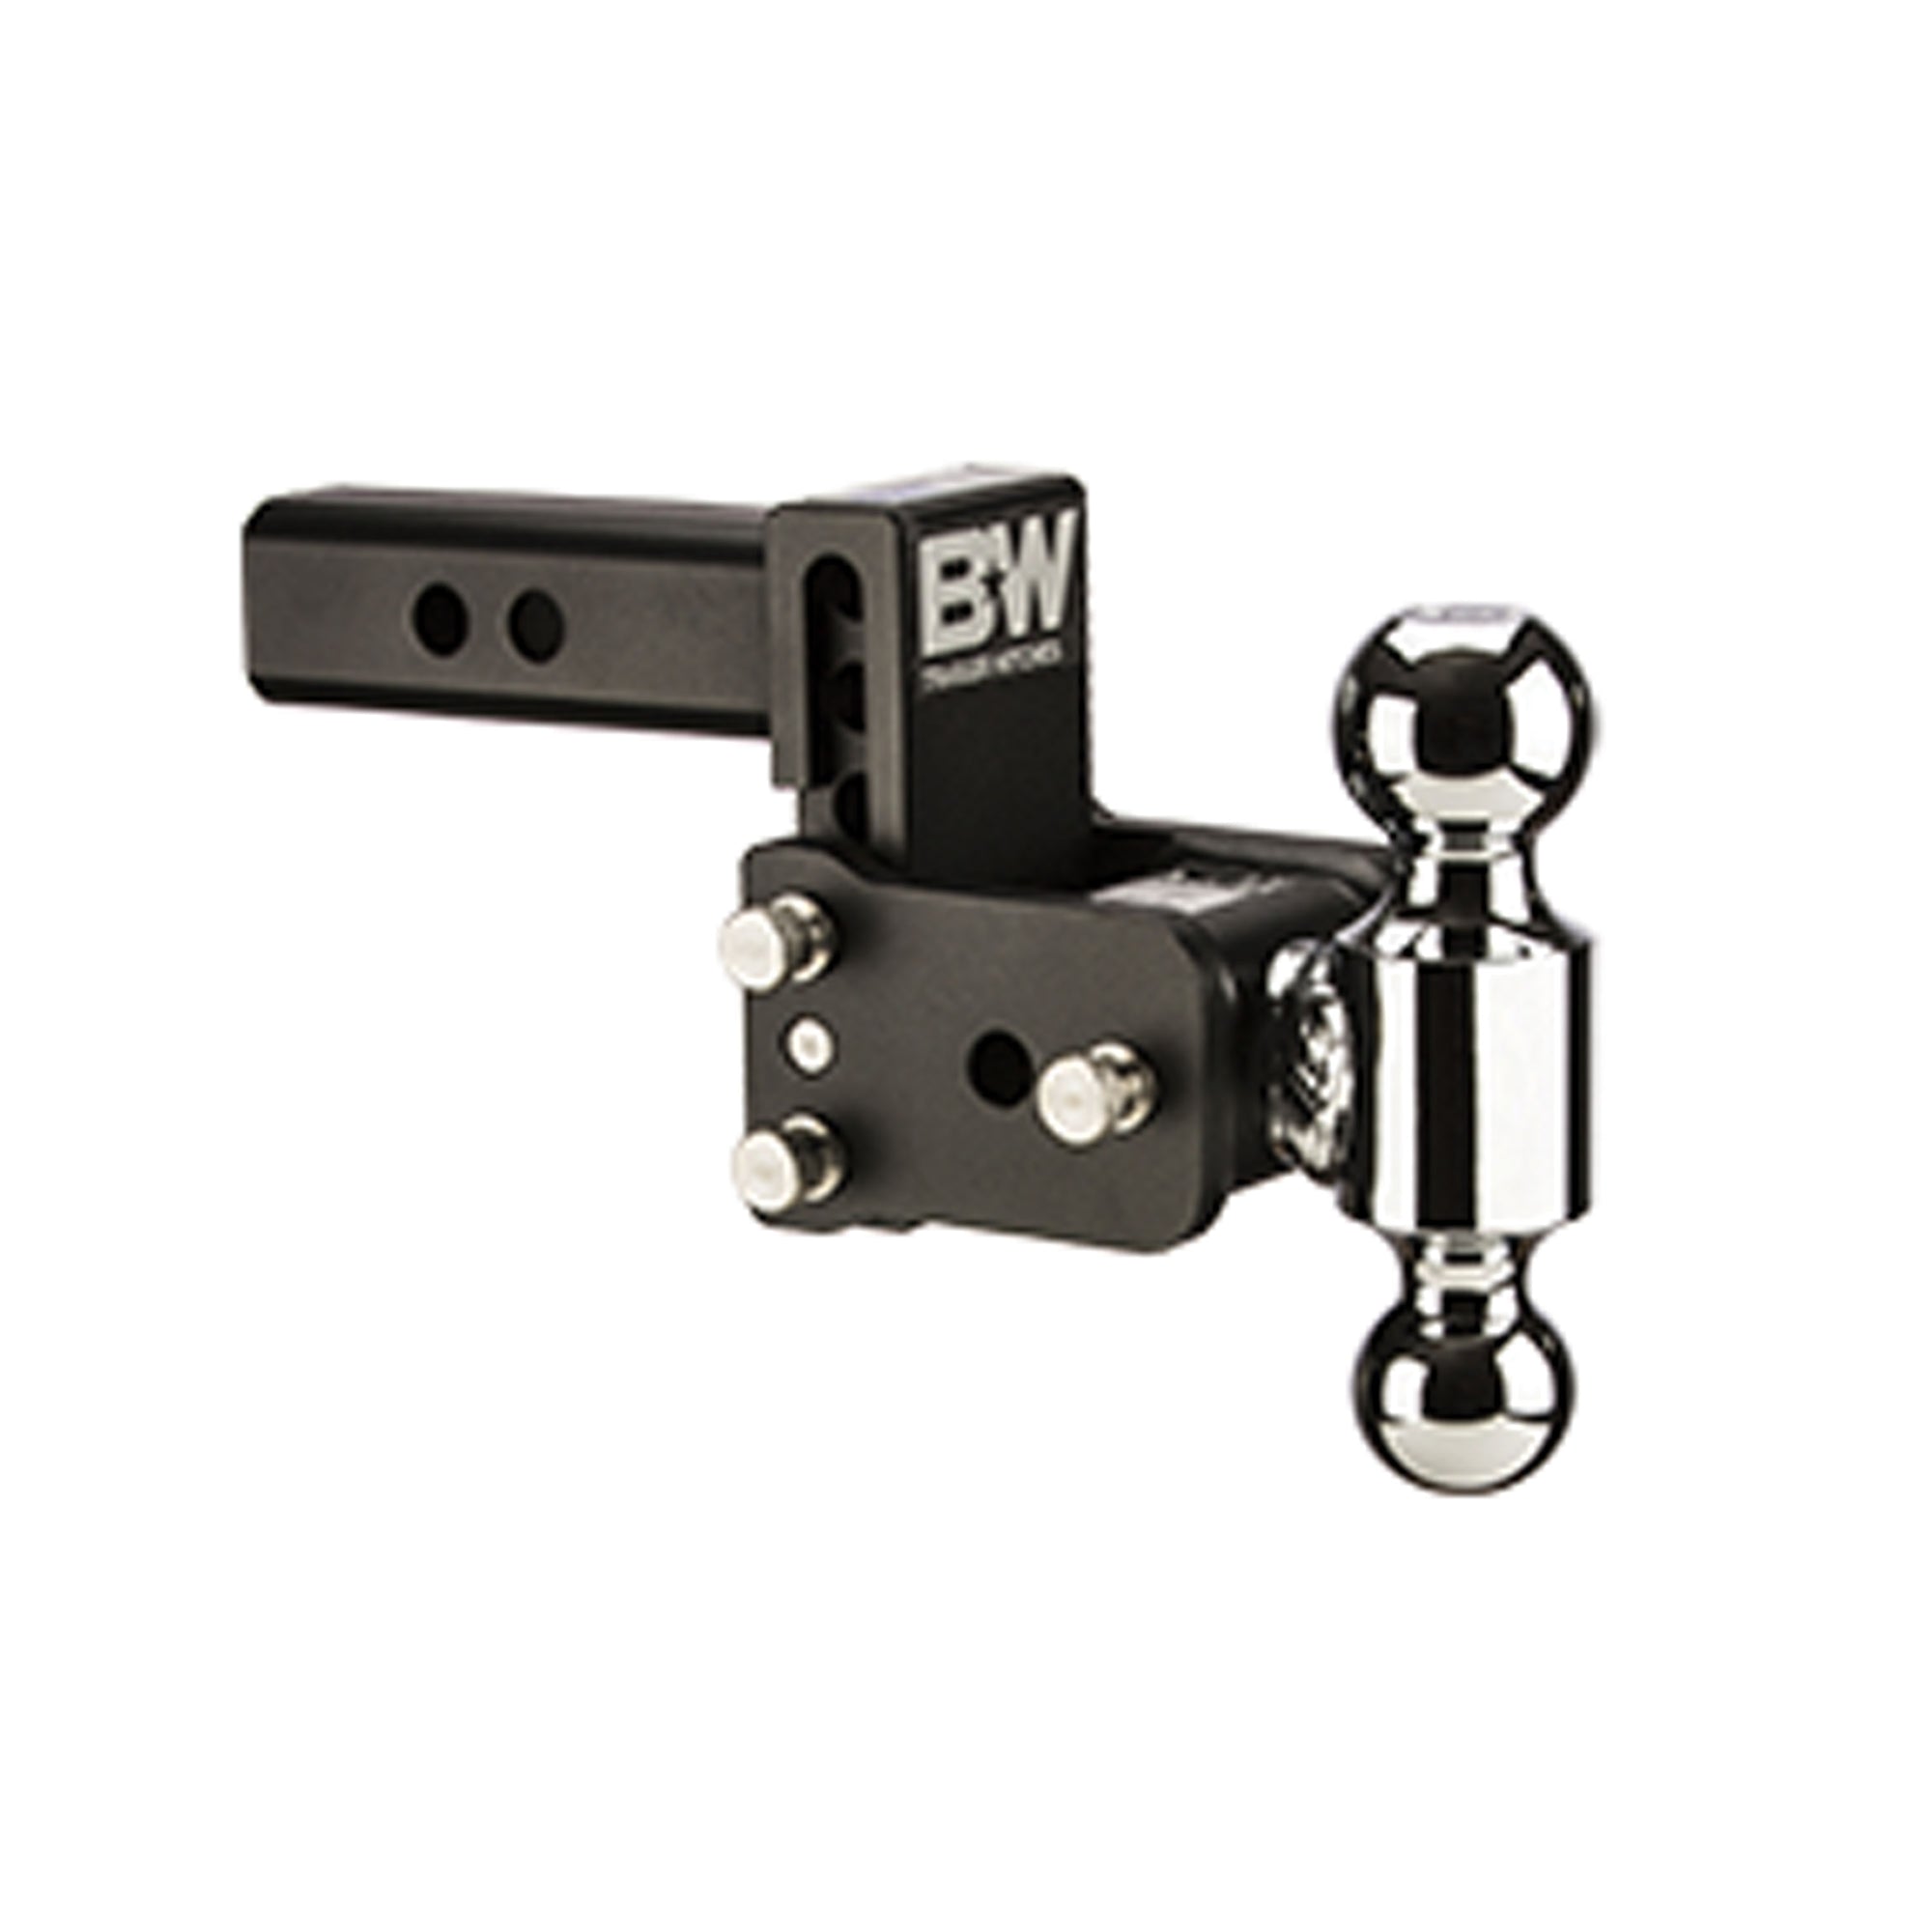 B&W Trailer Hitches TS10035B Tow and Stow Adjustable Ball Mount - 1-7/8" & 2" Ball, 3" Drop, 3.5" Rise, Black